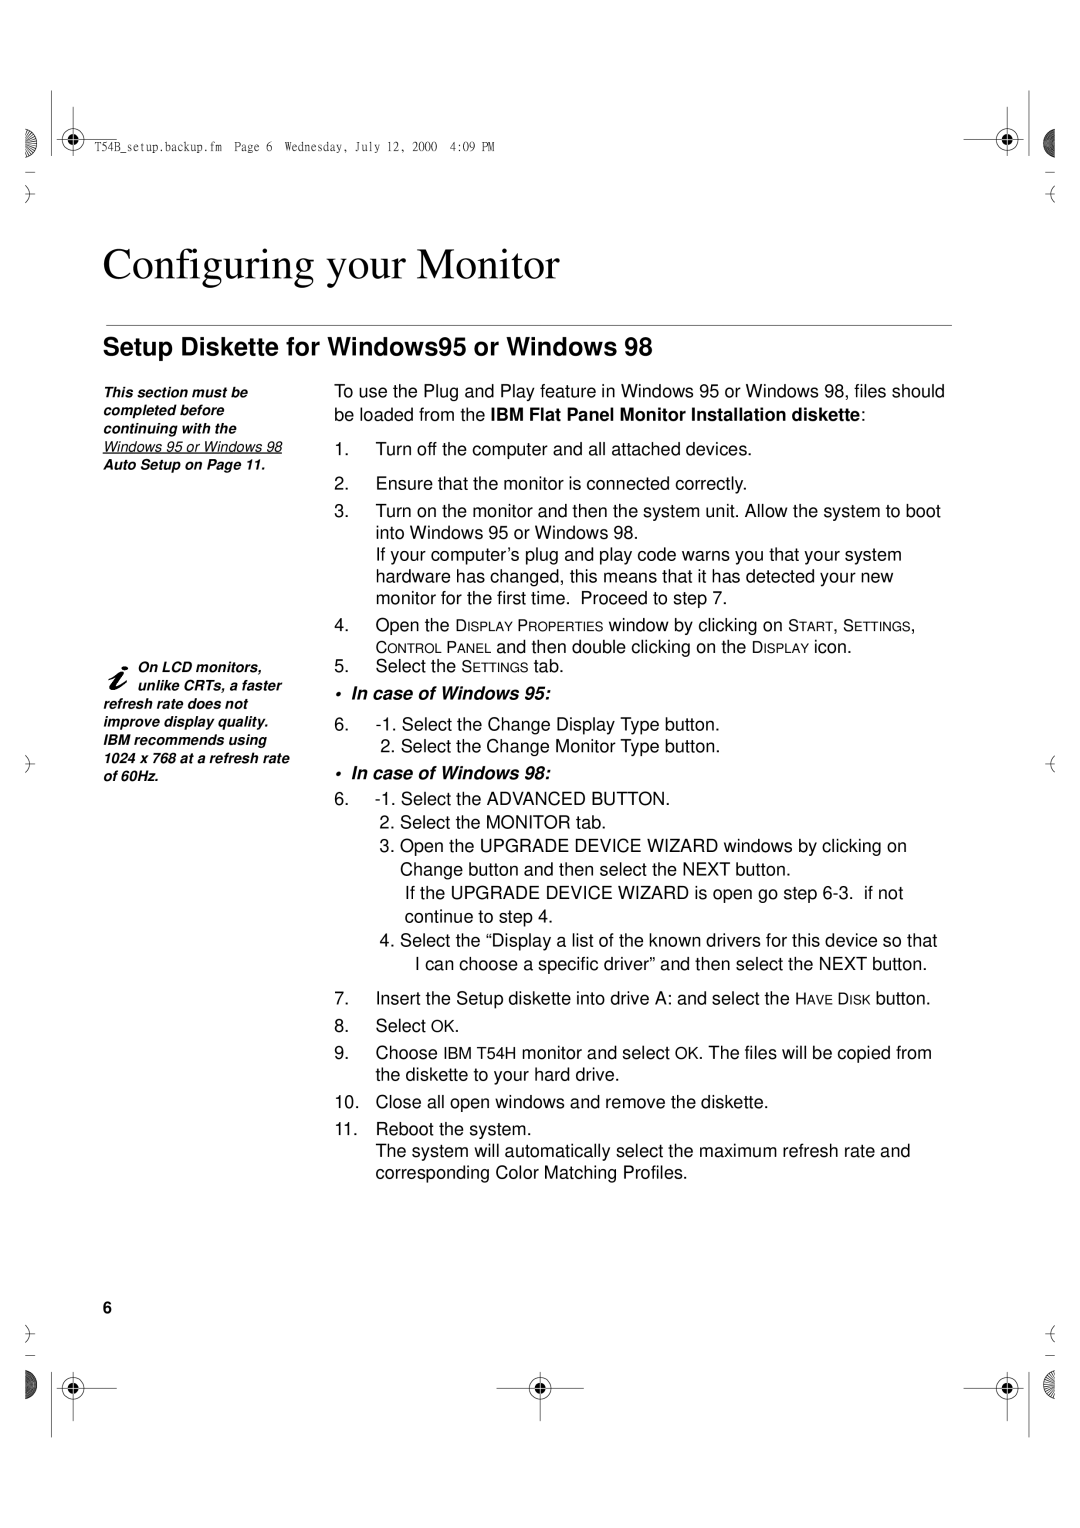 Lenovo T54H manual Configuring your Monitor, Setup Diskette for Windows95 or Windows 